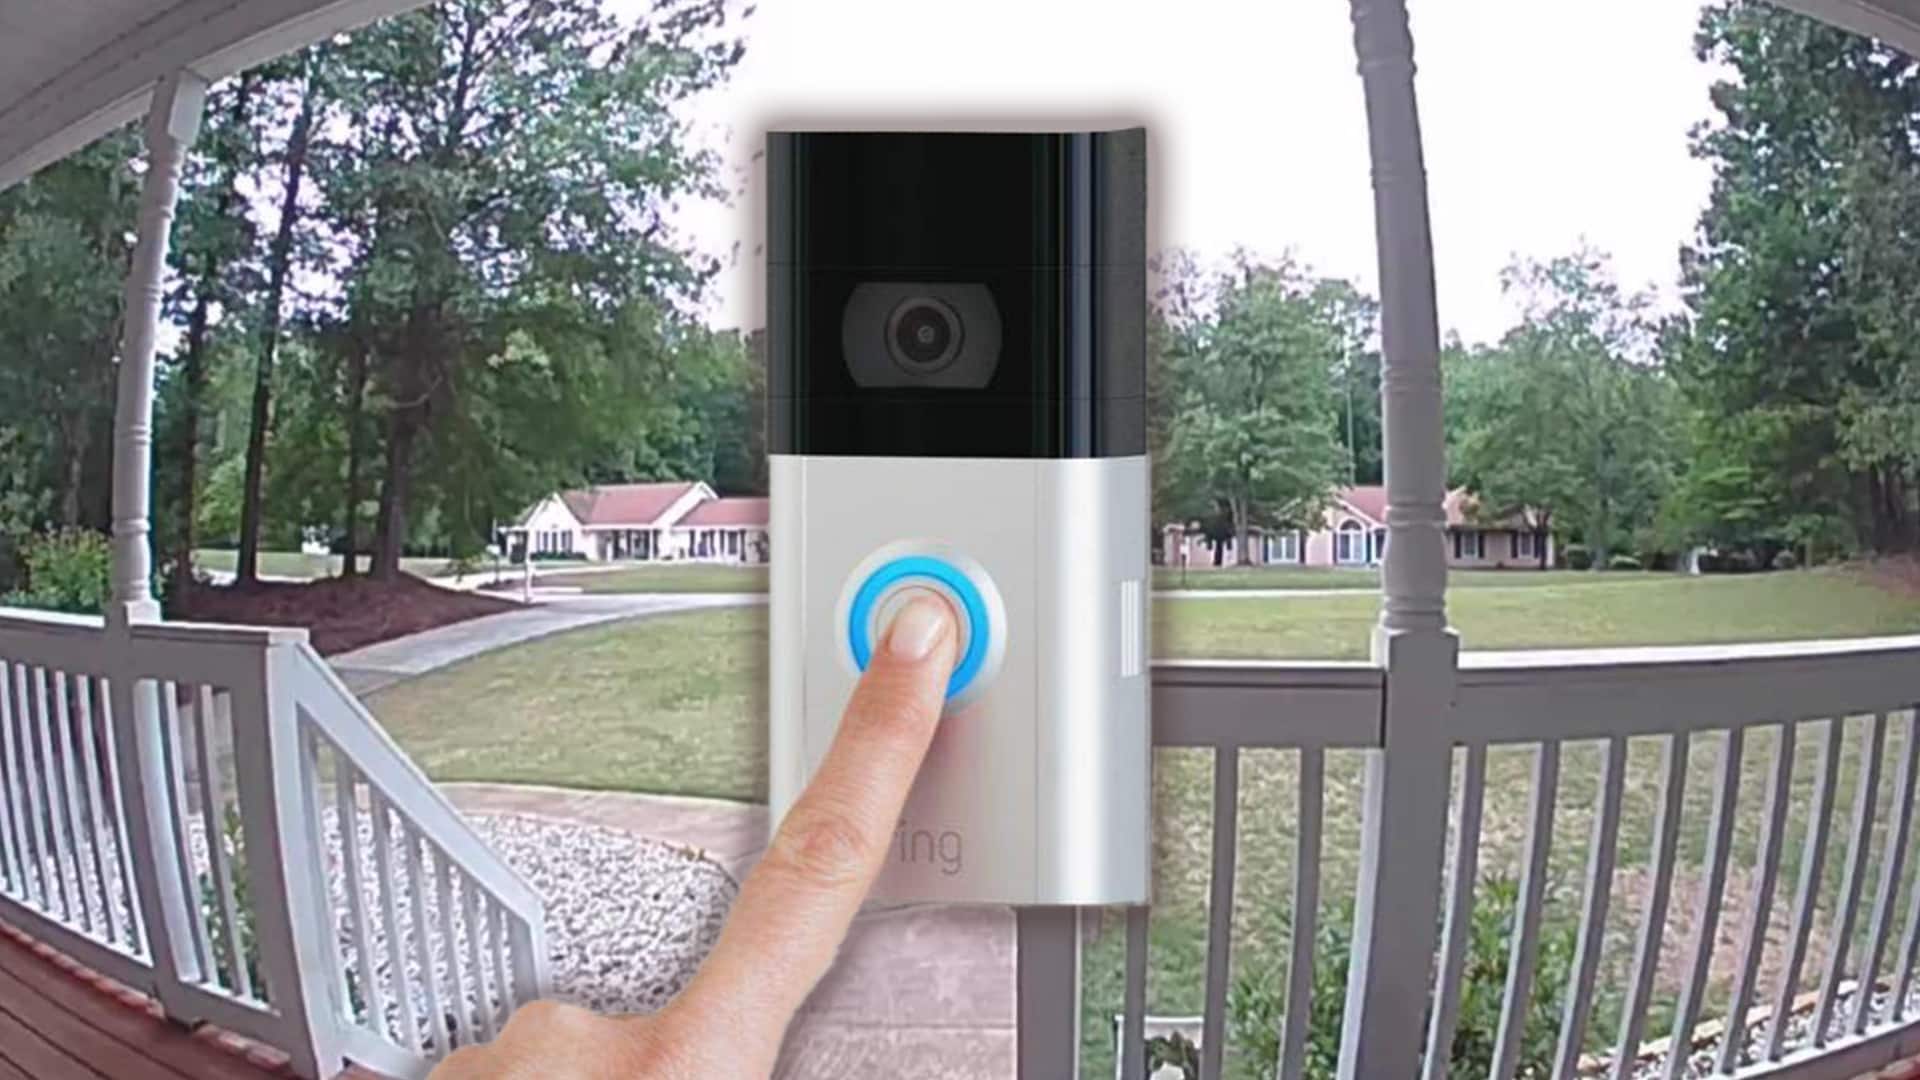 The Best Black Friday Security Camera Deals